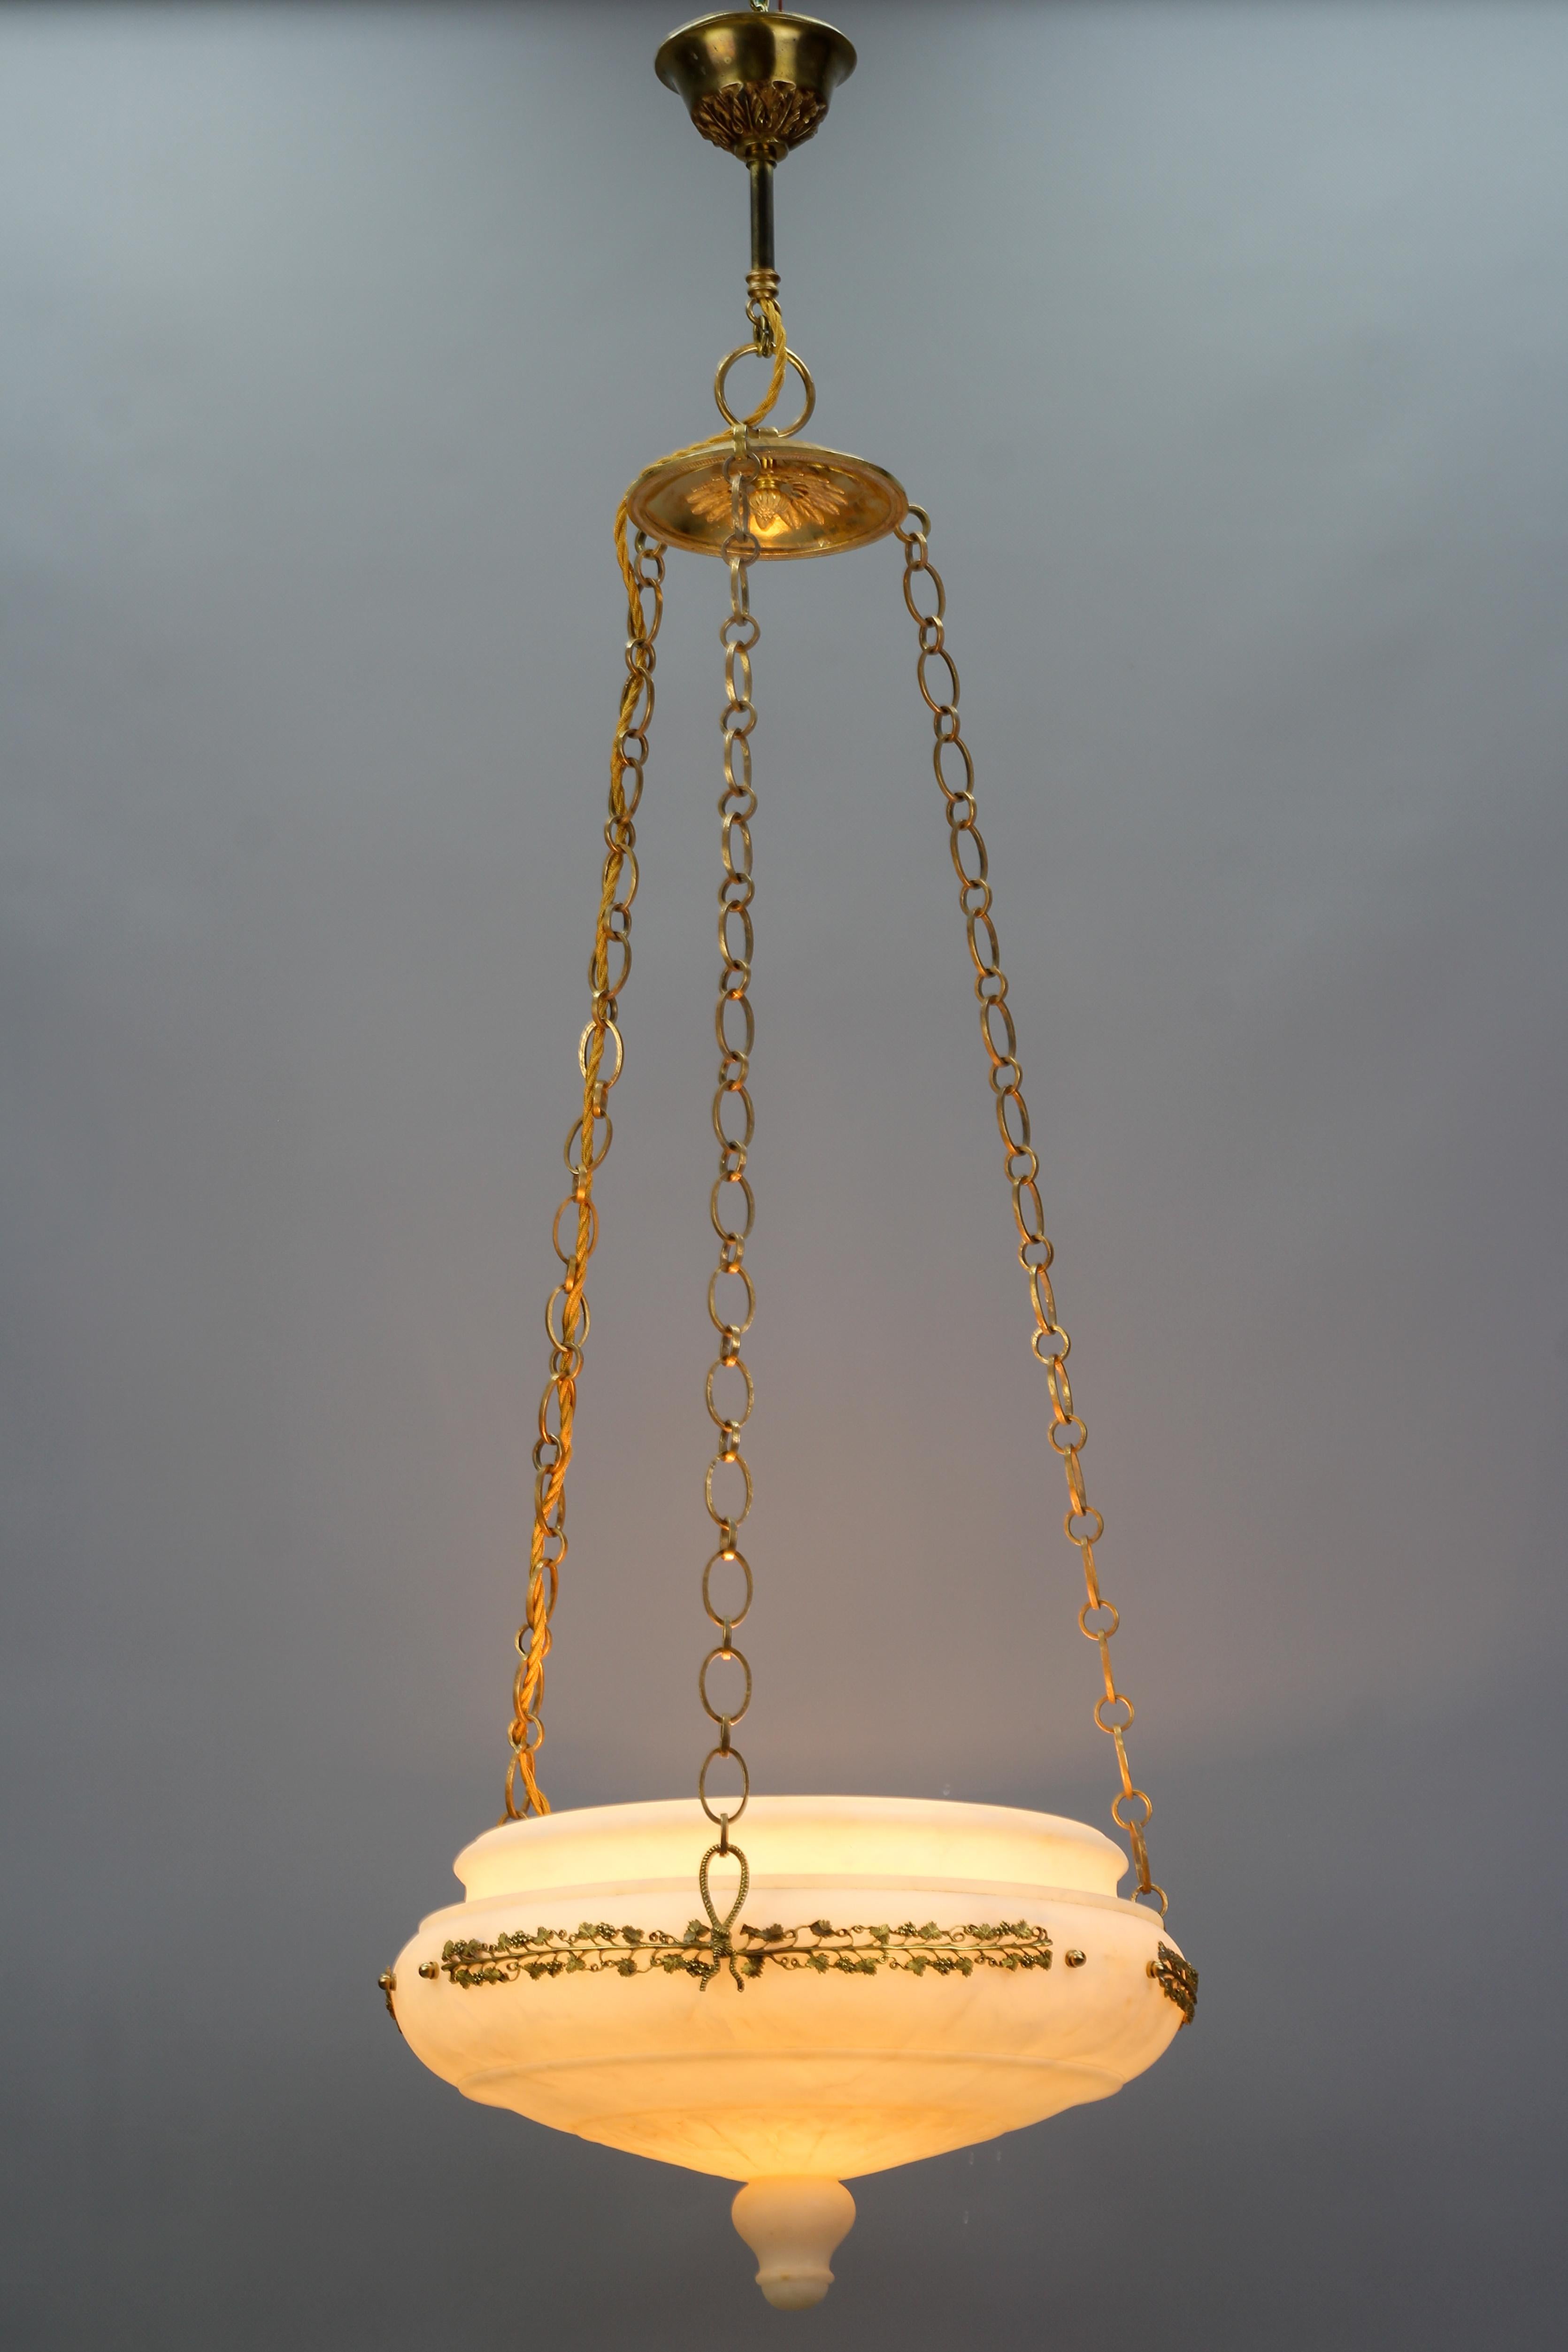 French Neoclassical style alabaster, gilt bronze, and brass pendant light fixture.
This impressive antique pendant light features a beautifully shaped carved white and ivory tone alabaster bowl hung on chains and fittings made of brass and gilt